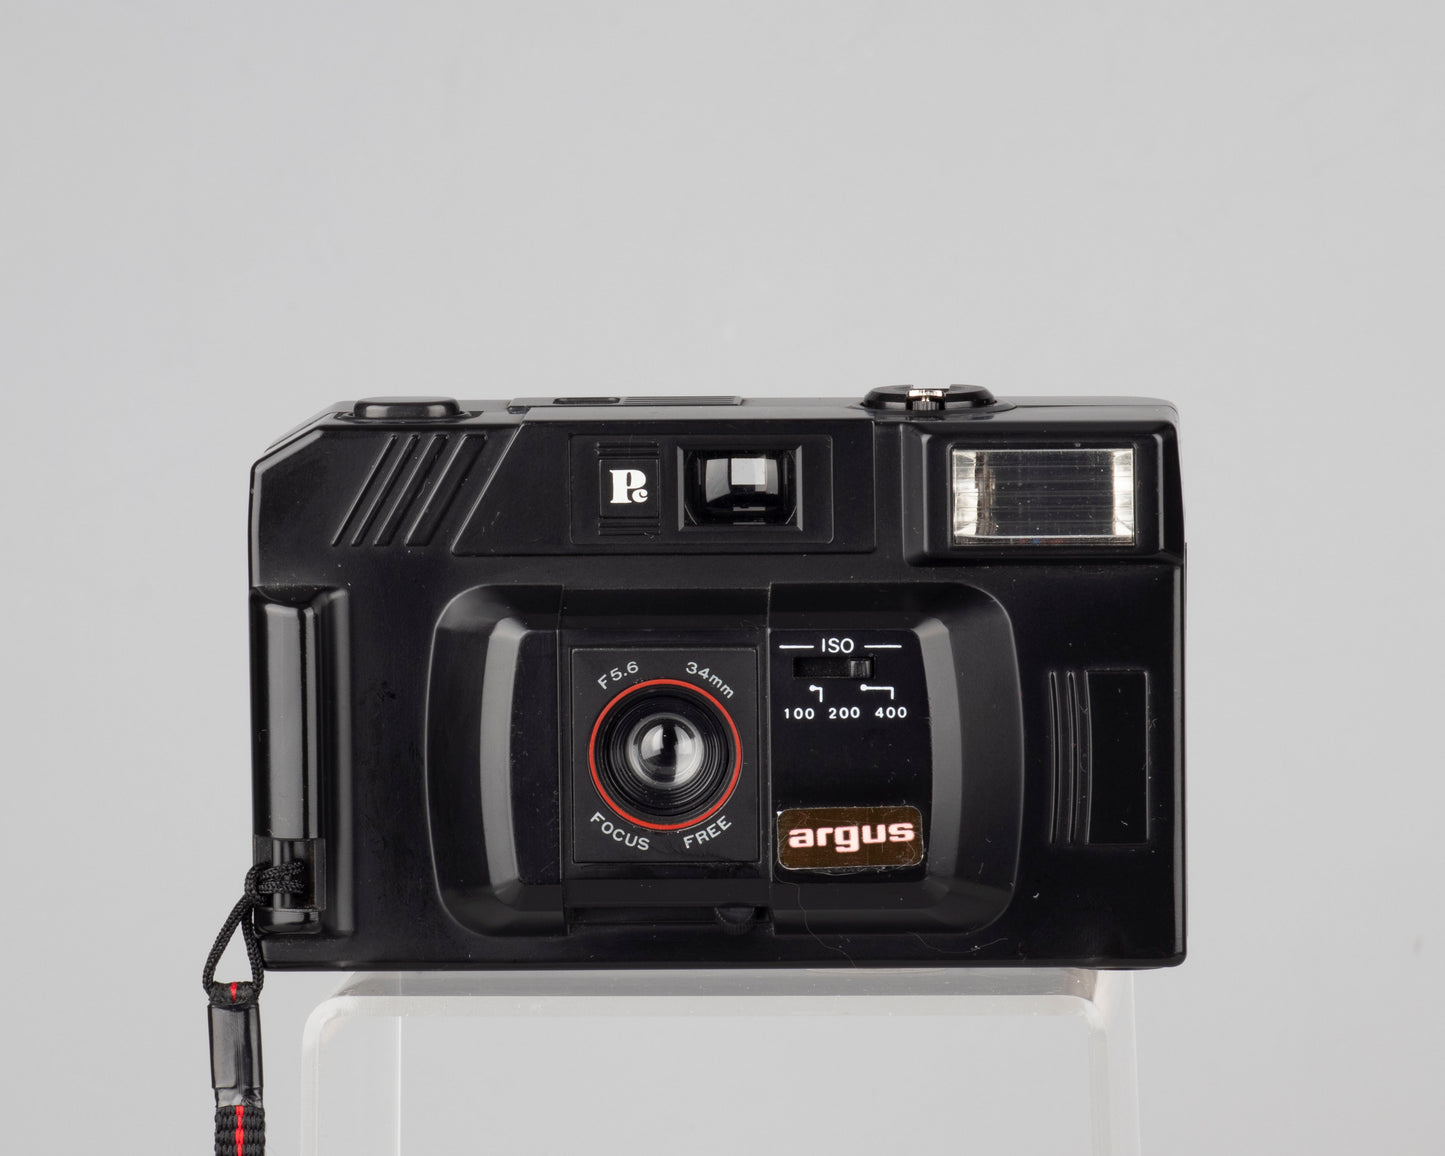 The Argus Pc is a simple focus free mechanical camera from the 1980s with a built-in flash